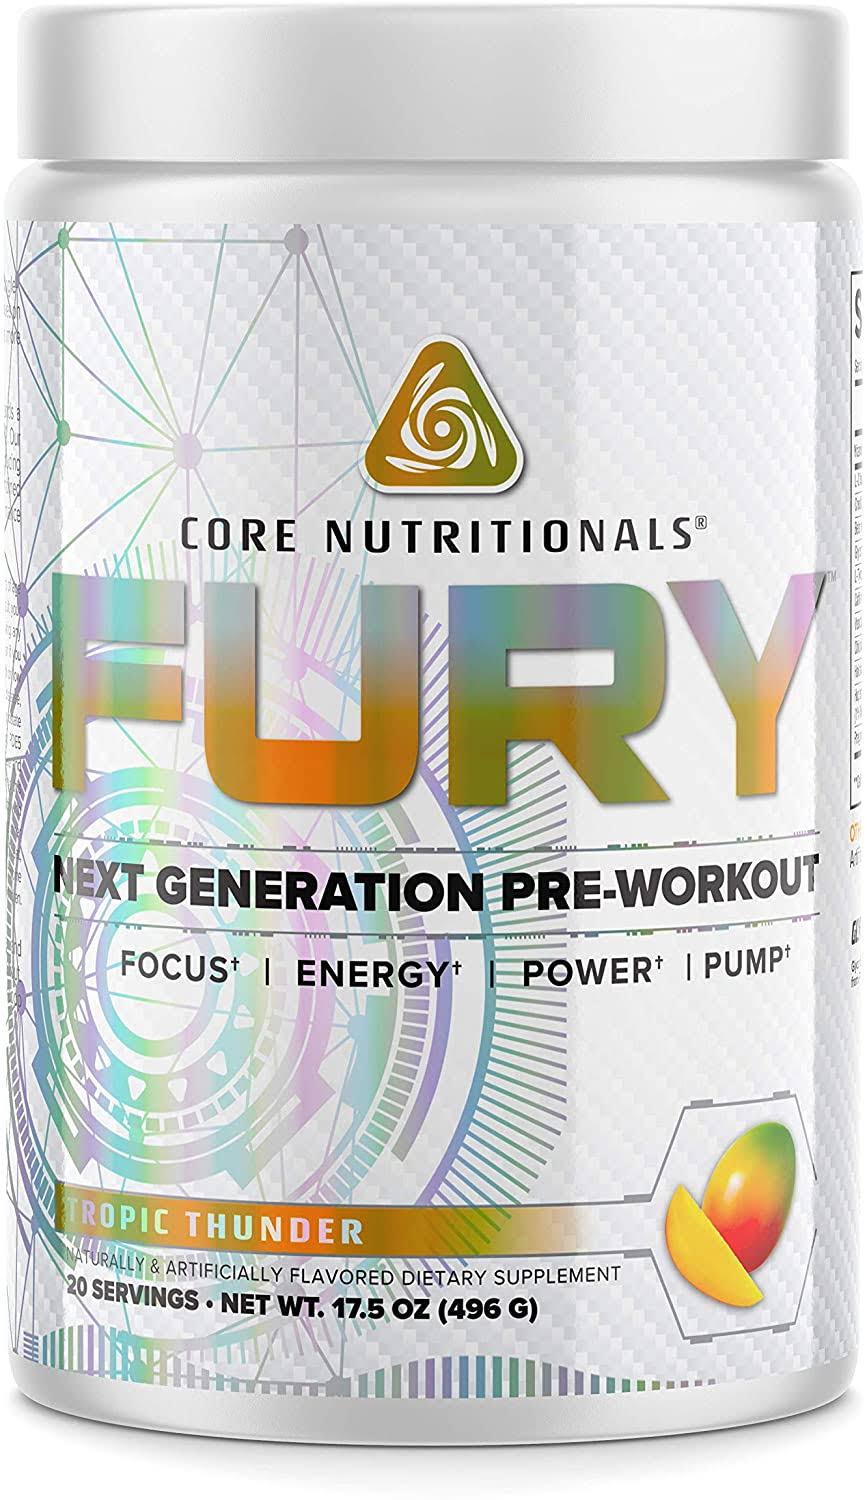 Core Nutritionals Fury - 20 Servings Tropic Thunder